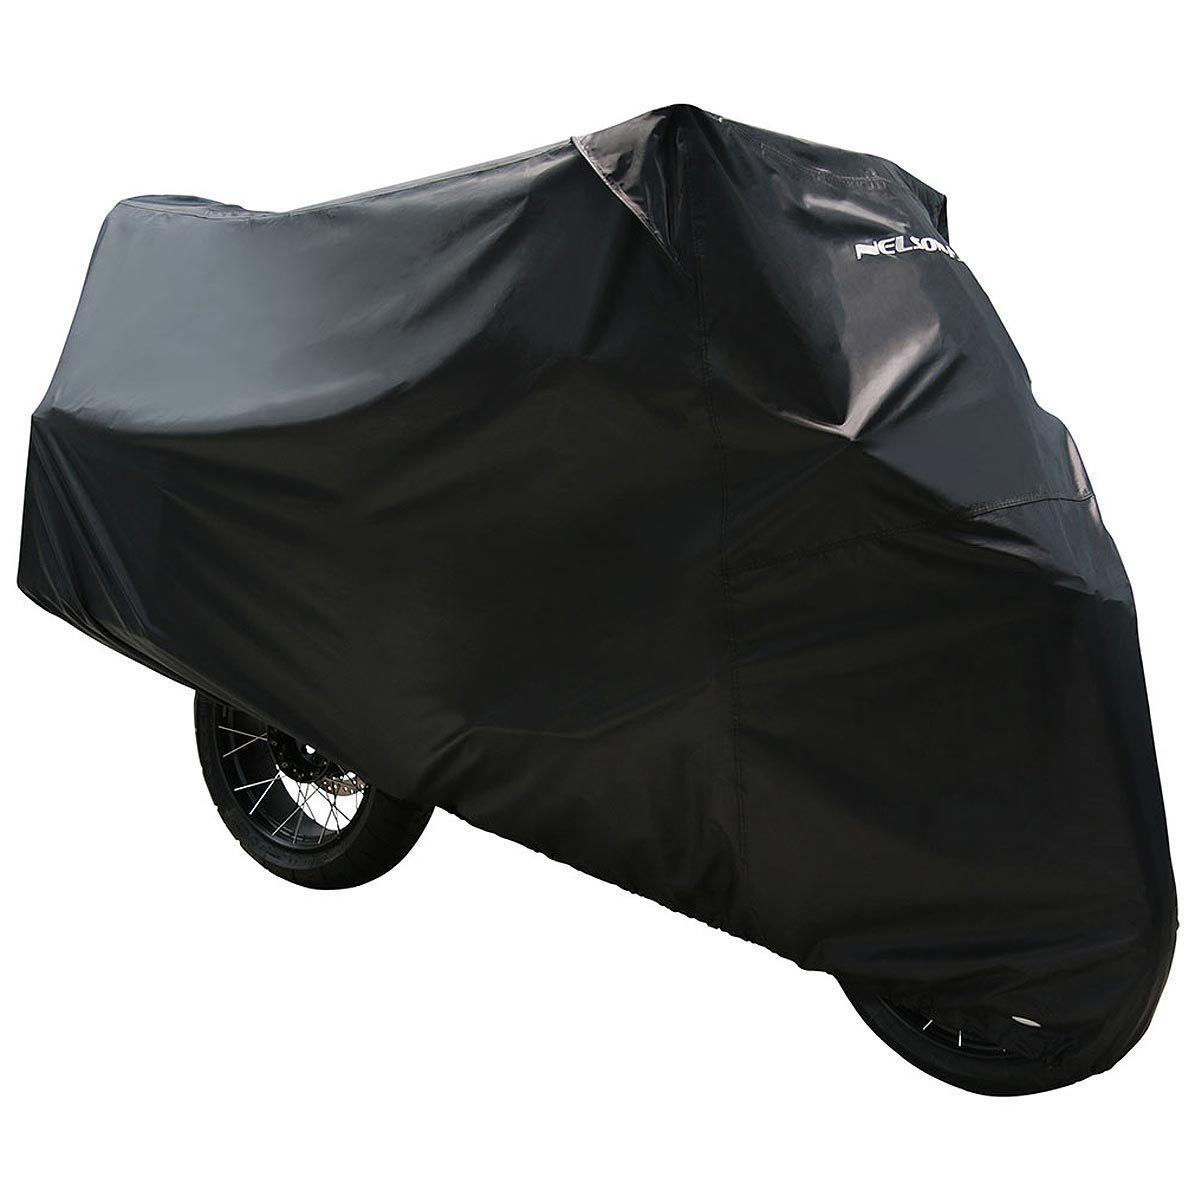 Nelson Rigg Defender Extreme Adventure Bike Cover